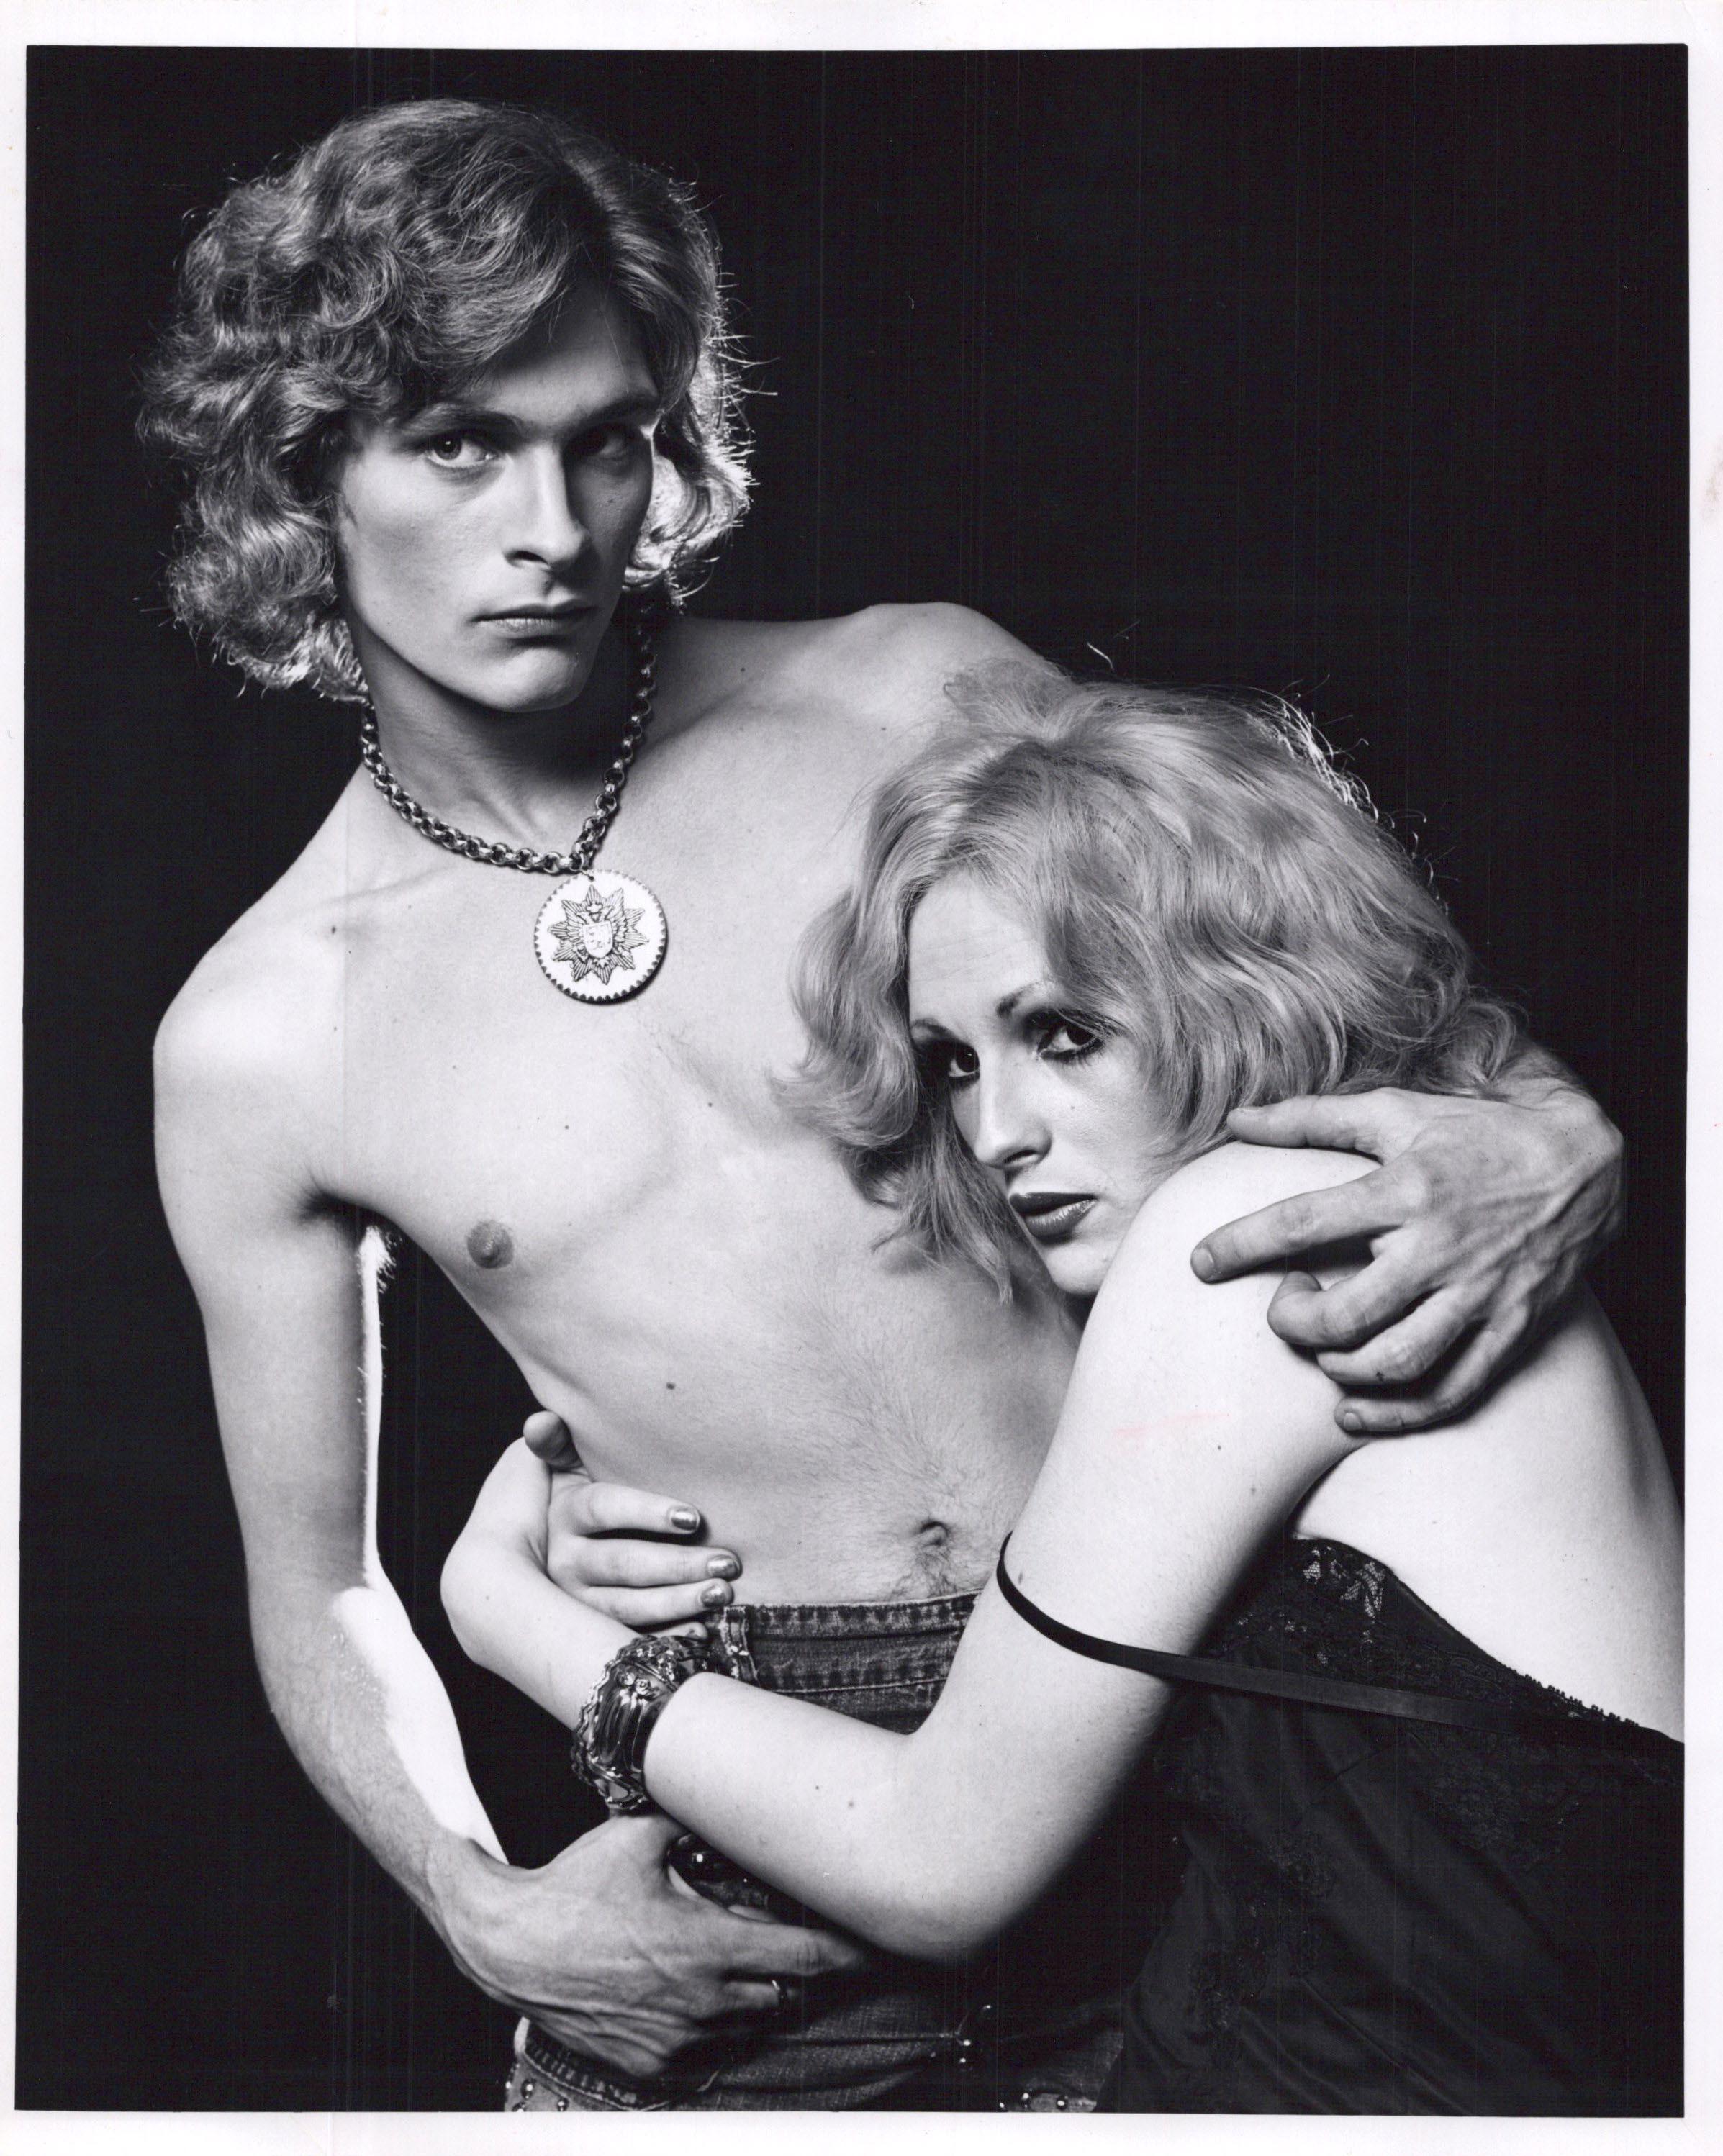 Jack Mitchell Black and White Photograph - Andy Warhol Superstar Candy Darling and Dorian Gray